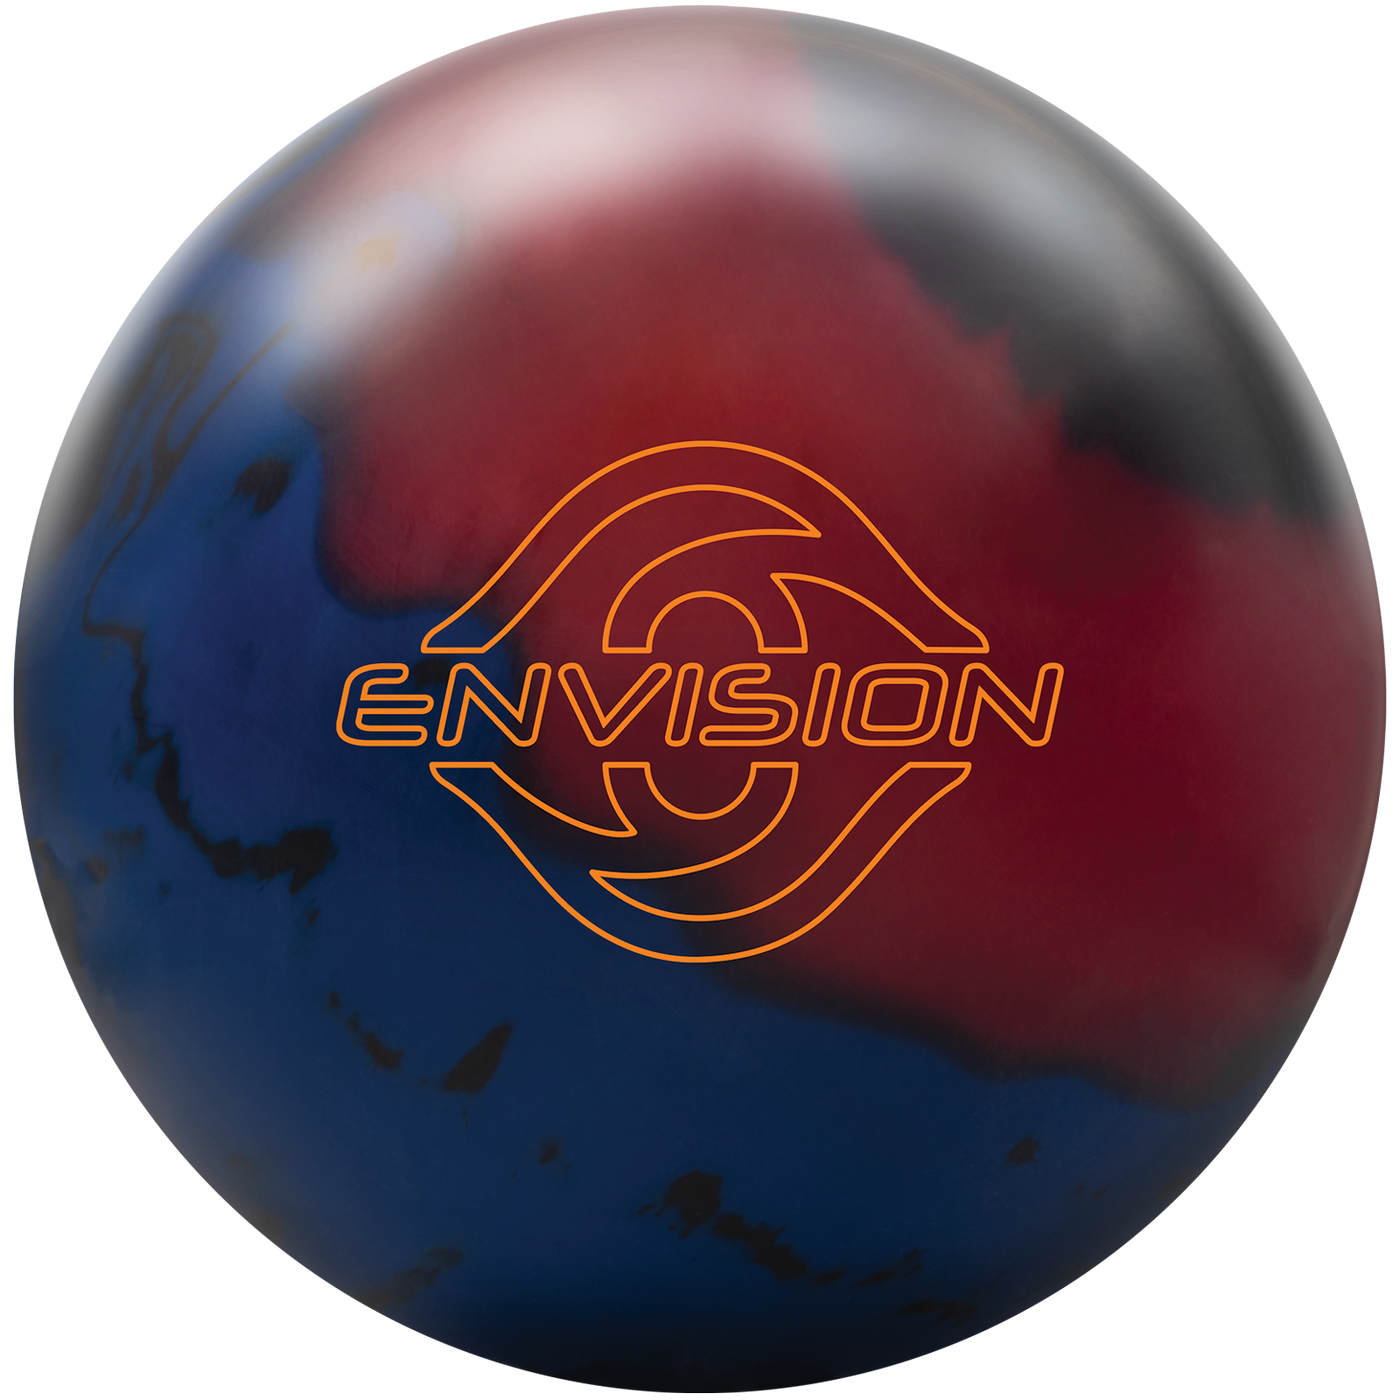 Envision bowling ball in Navy, Red, and Black colors